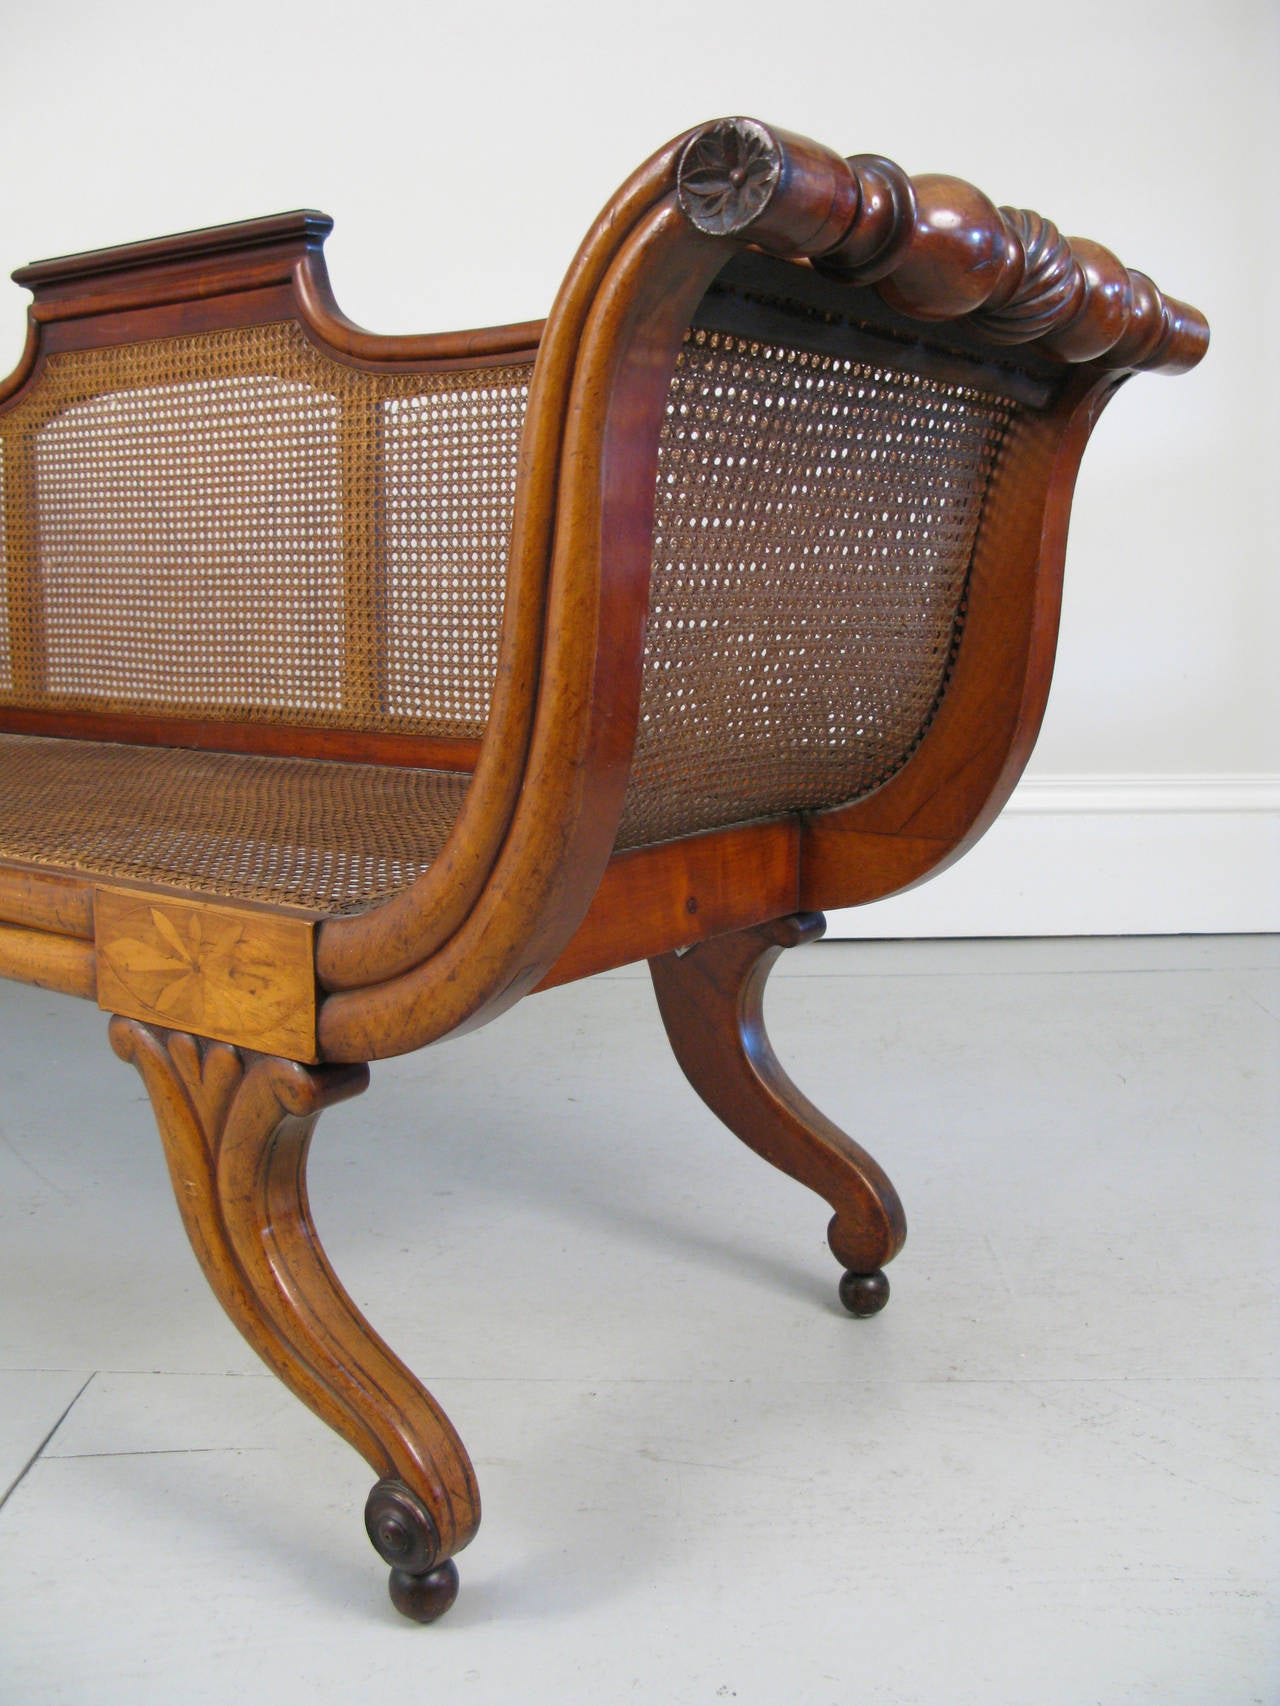 Woodwork Spectacular 19th Century Anglo-Caribbean Caned Settee